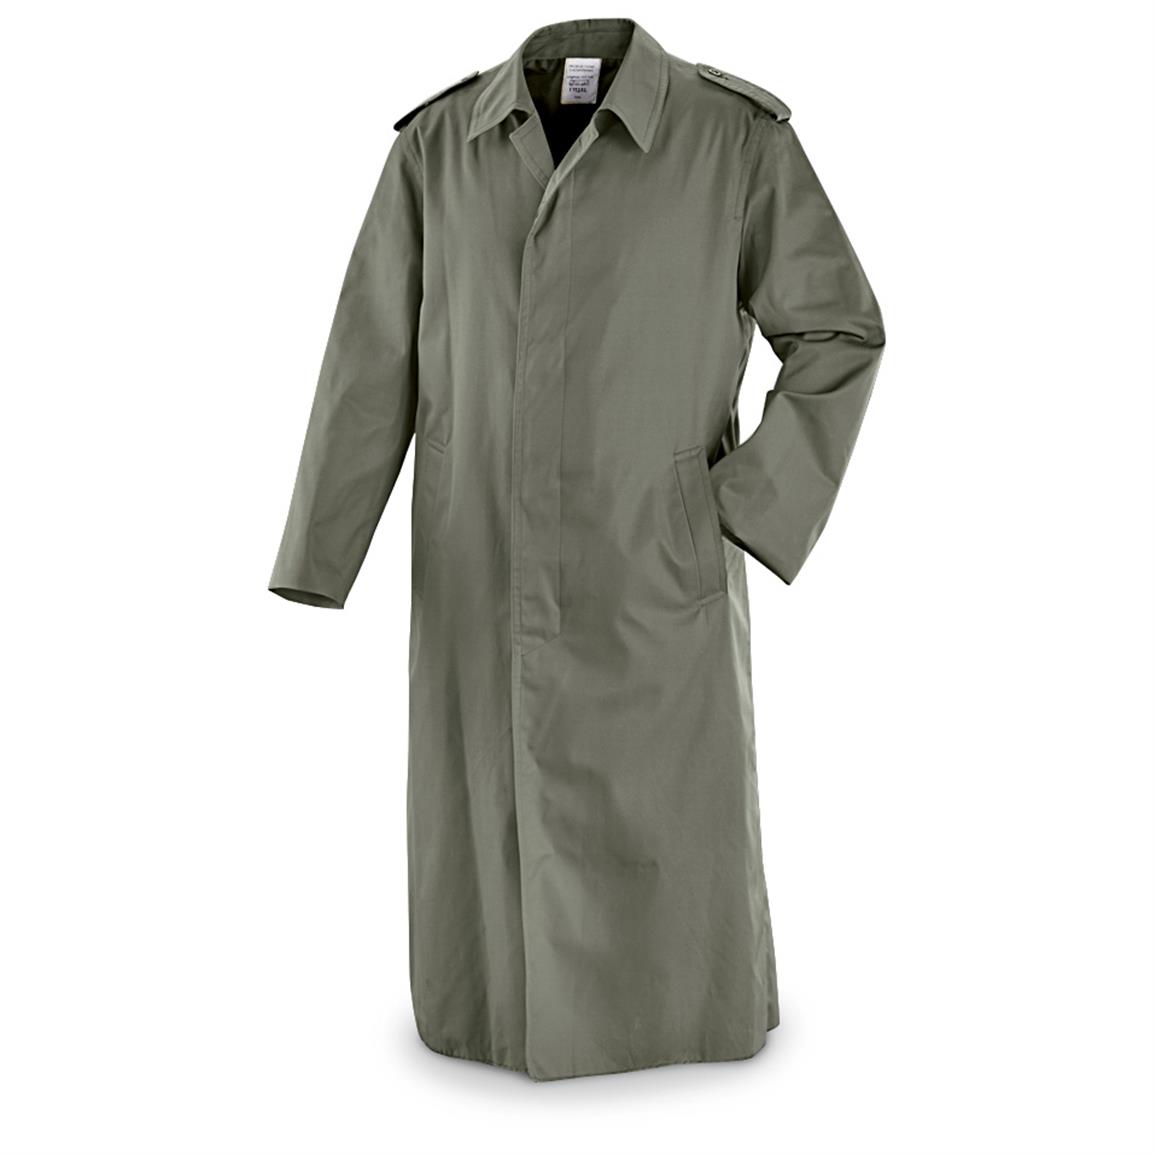 New French Military Surplus Officer's Raincoat - 584505, Rain Gear ...